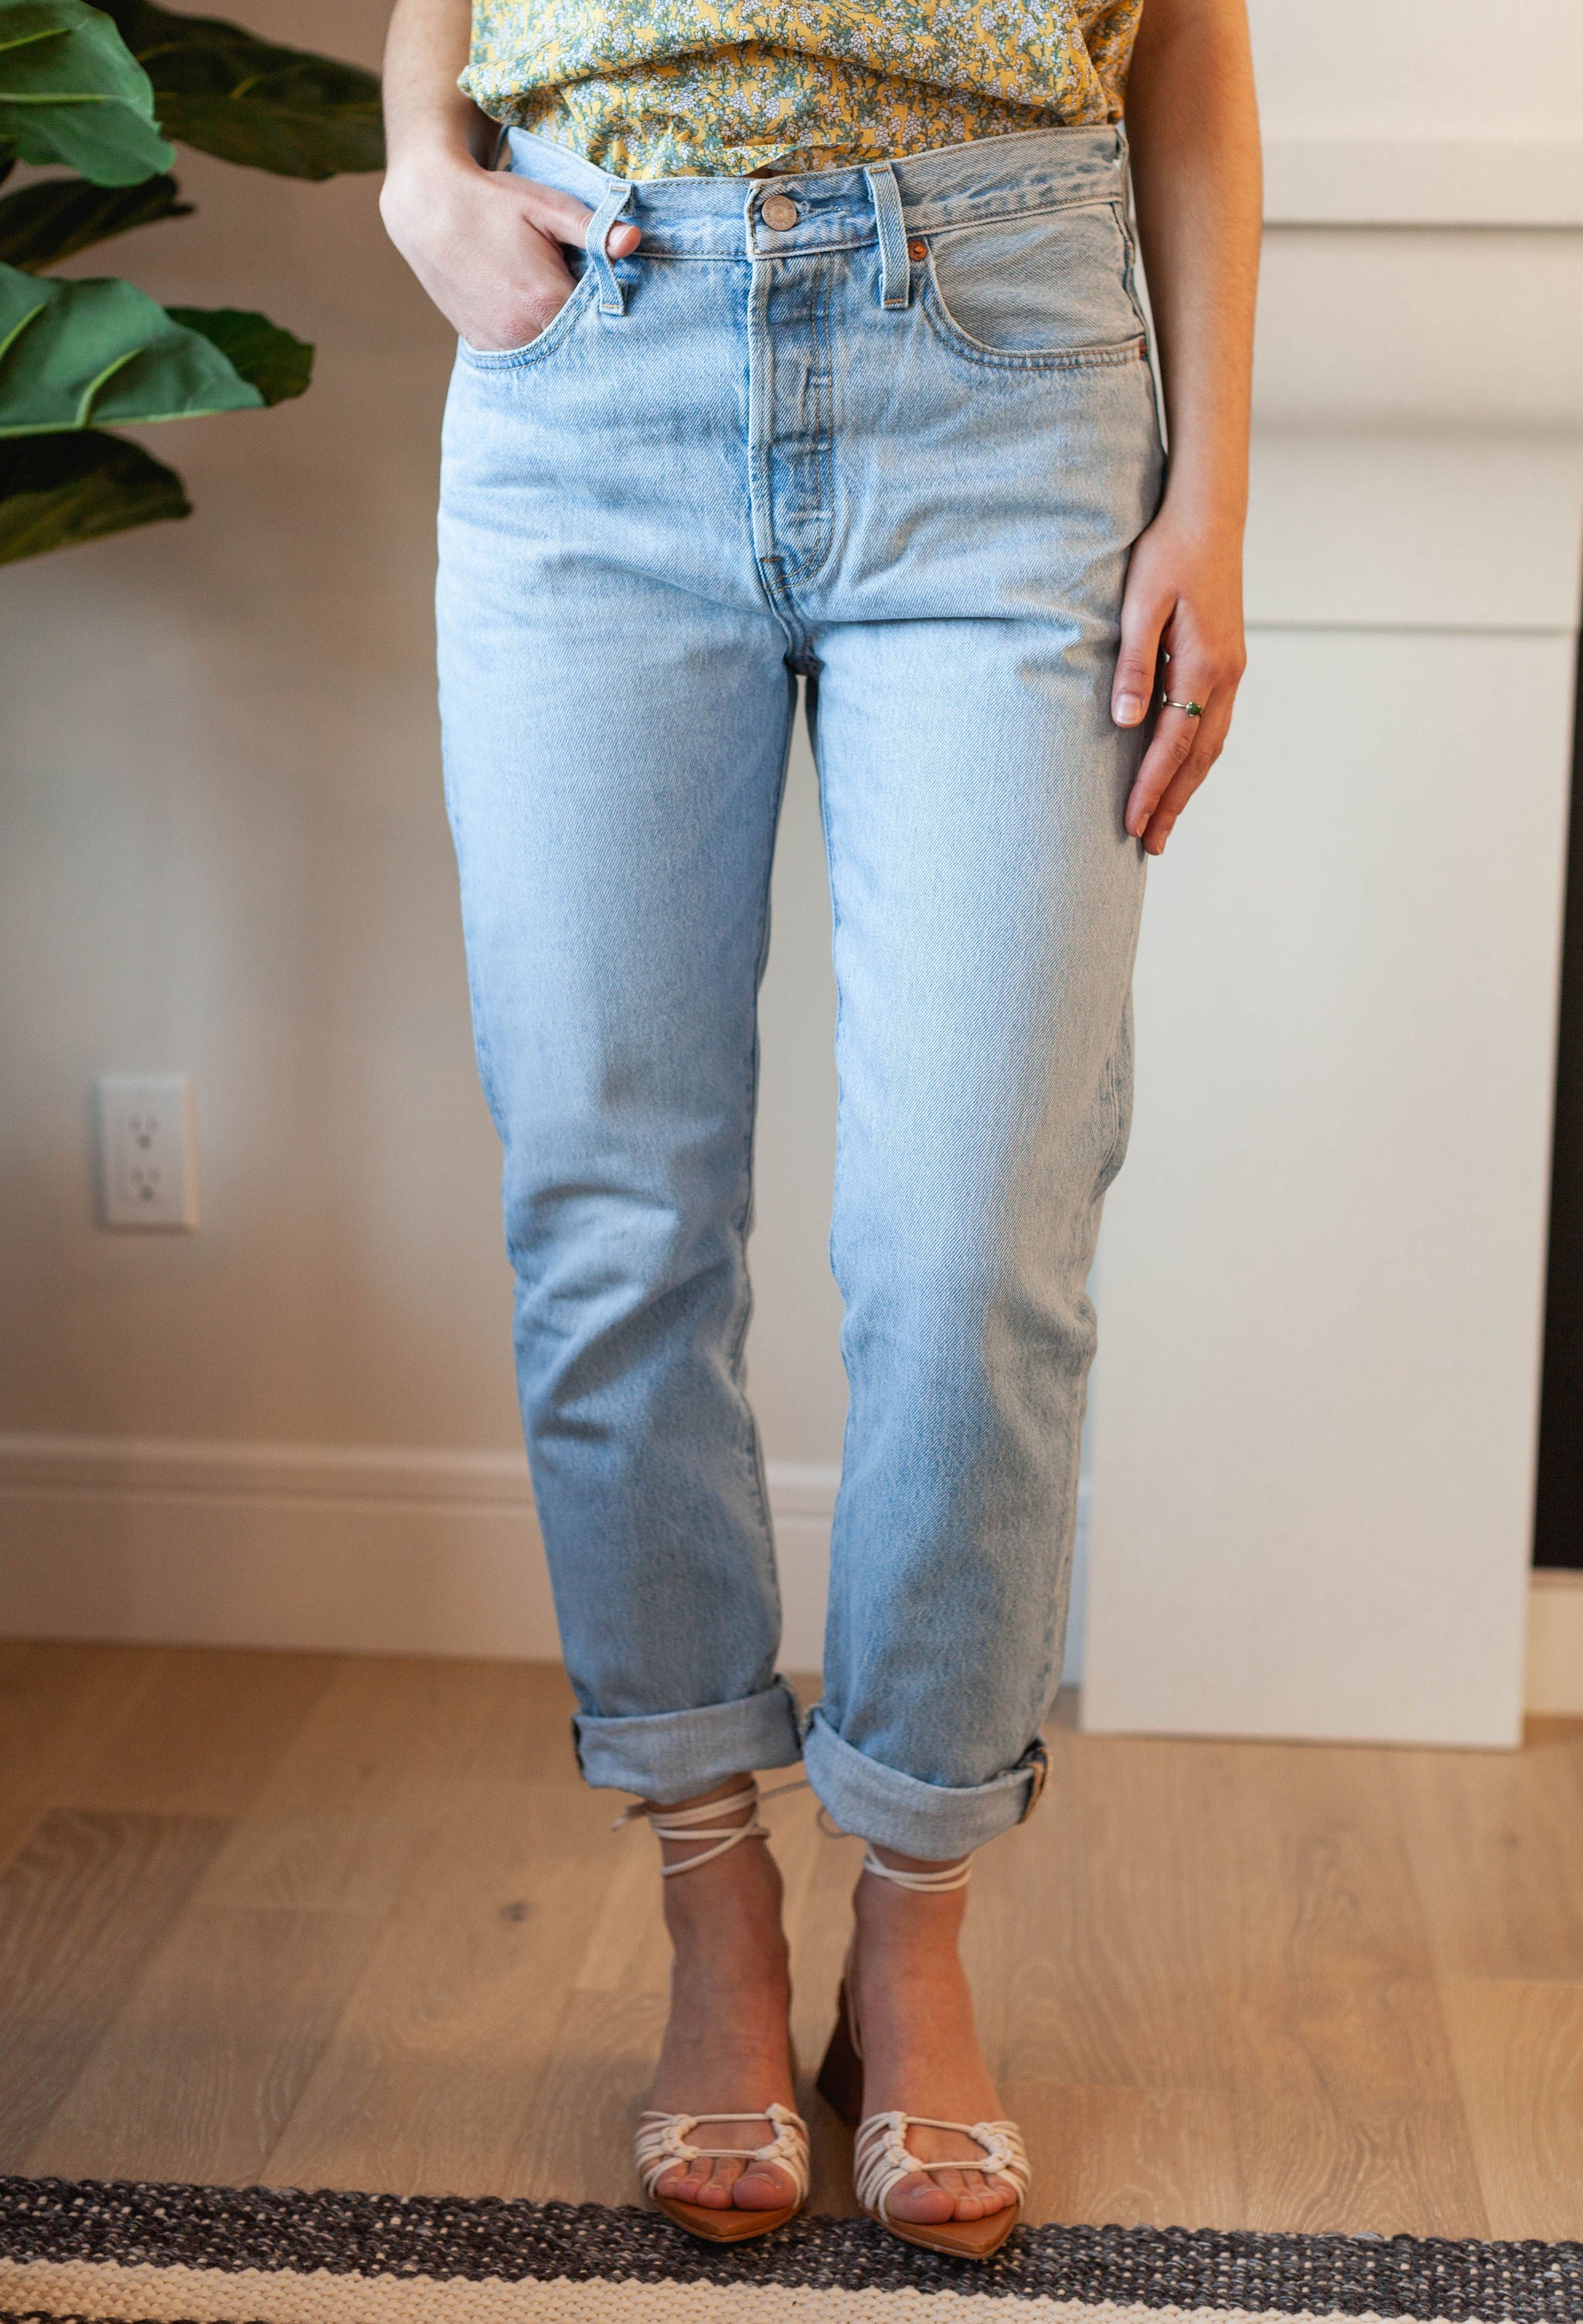 The 501 Original Cropped Jeans - Light Wash